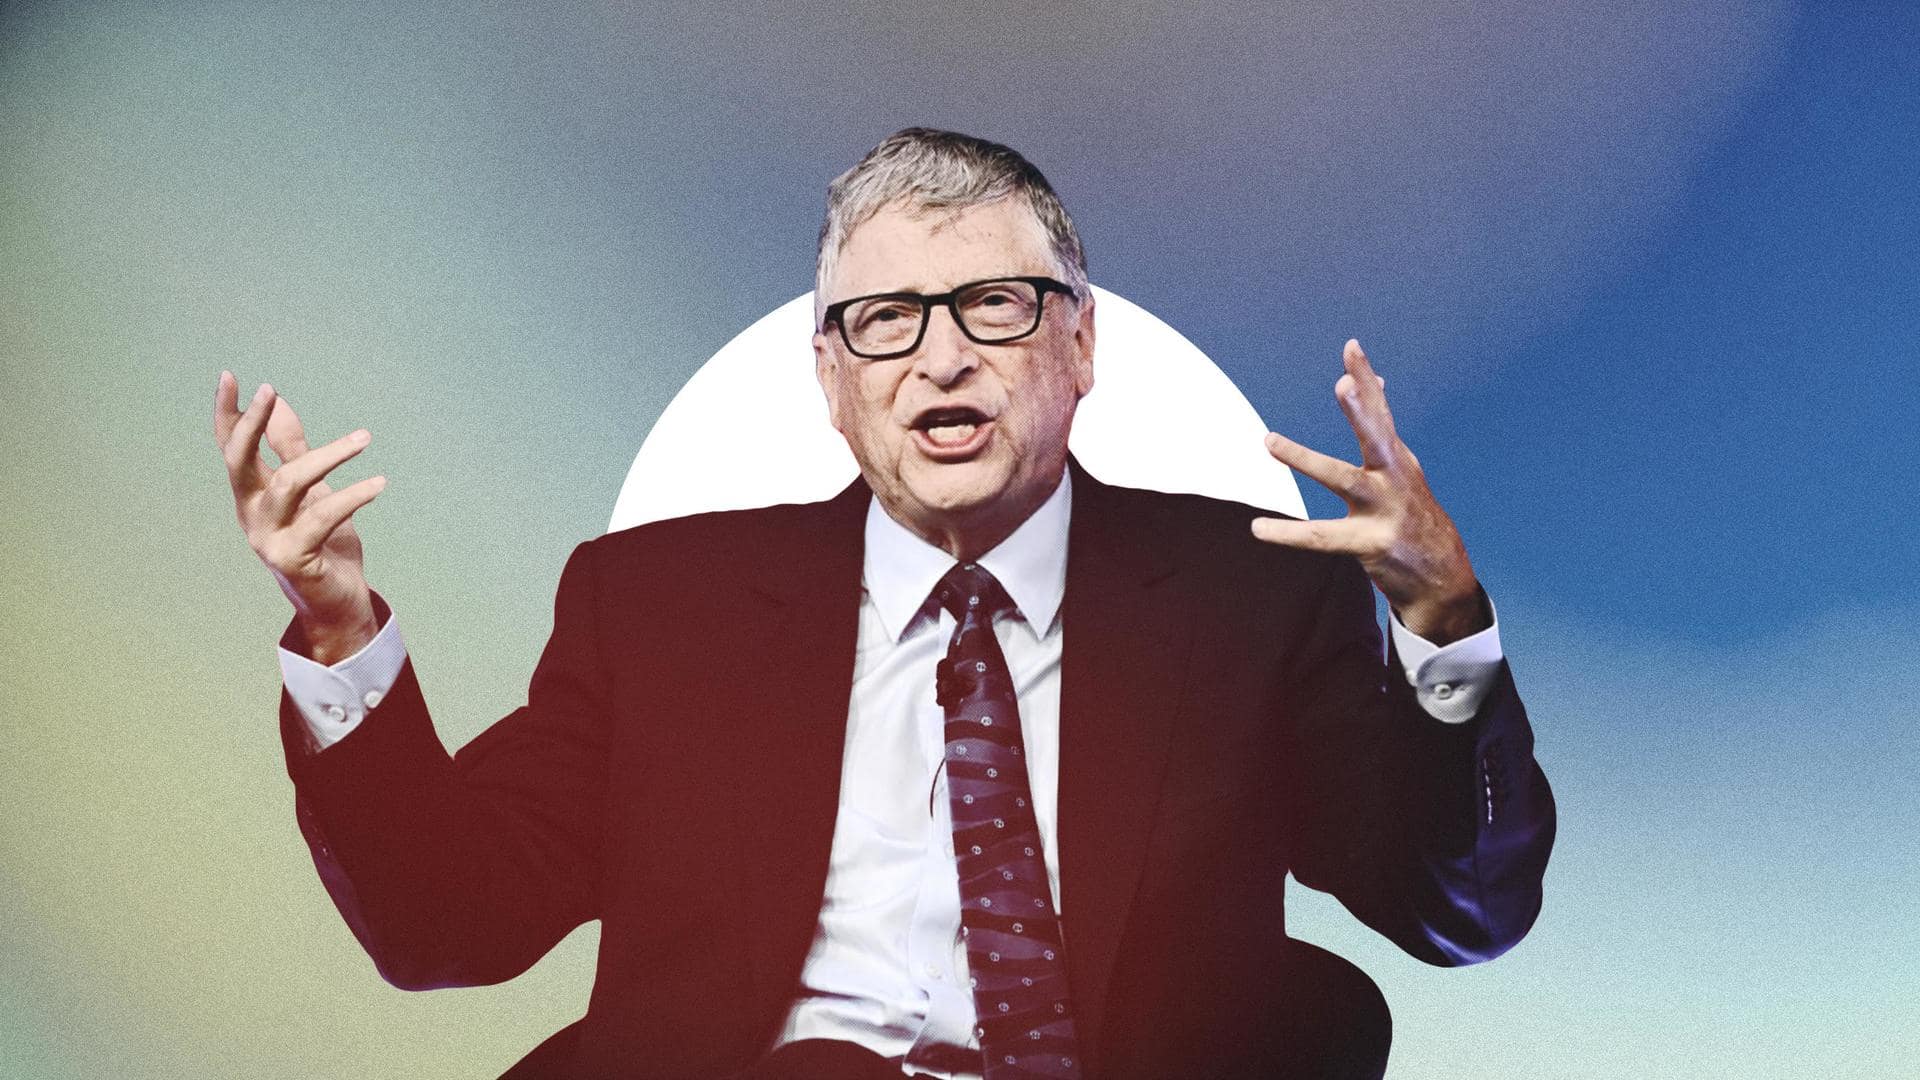 Bill Gates shares 5 life lessons for young students